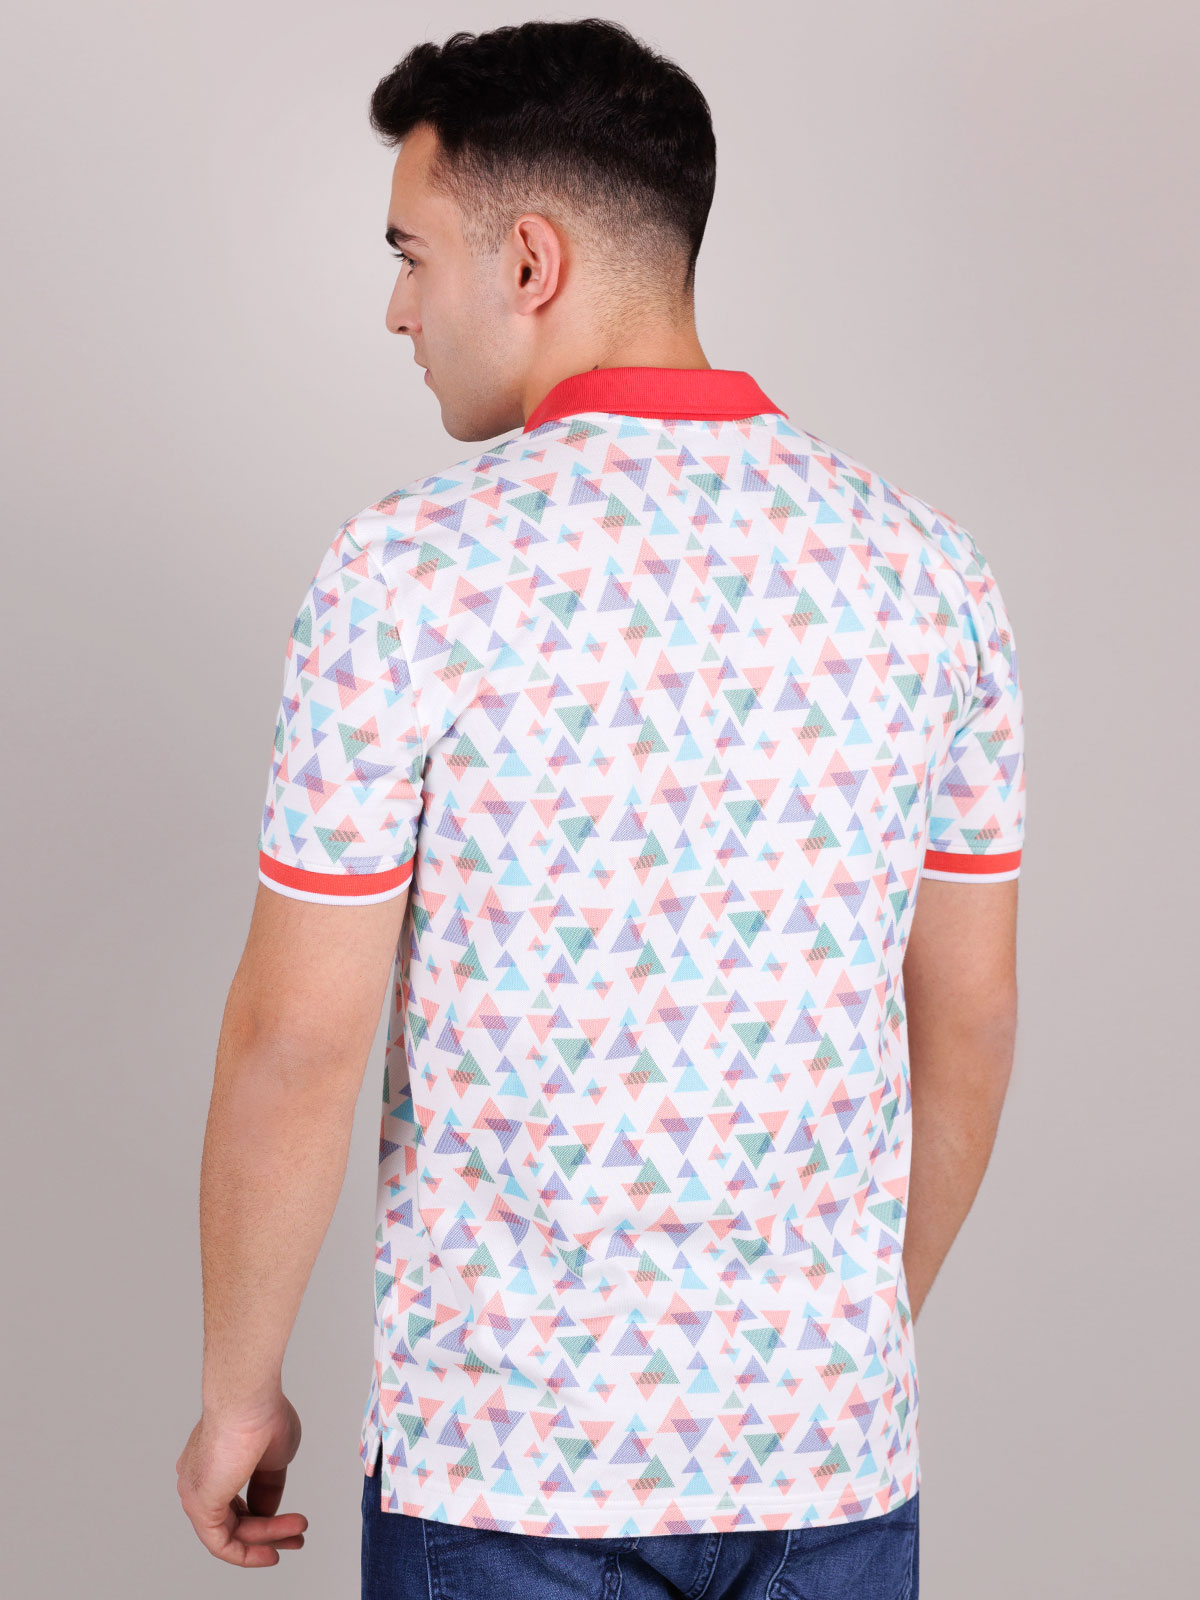 Tshirt in white with triangles - 93424 € 40.49 img2